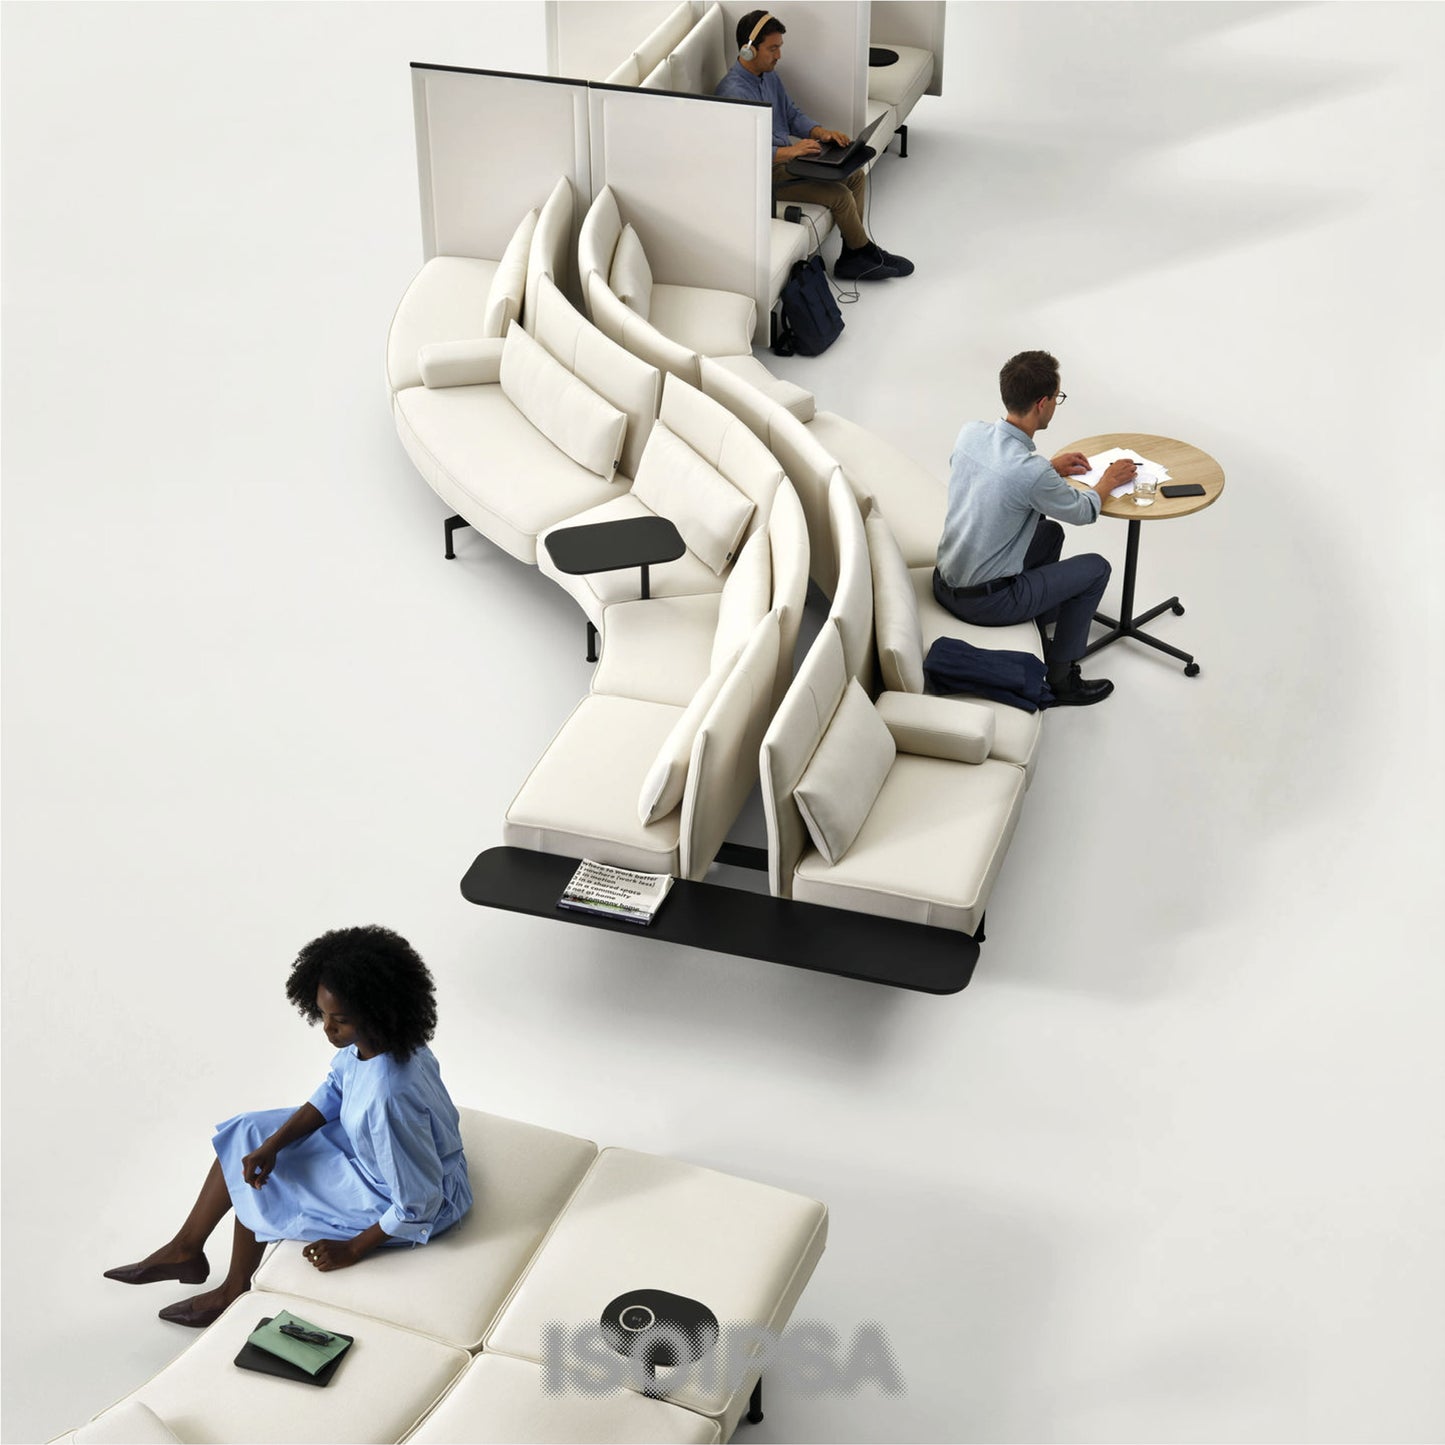 Soft Work Seating System